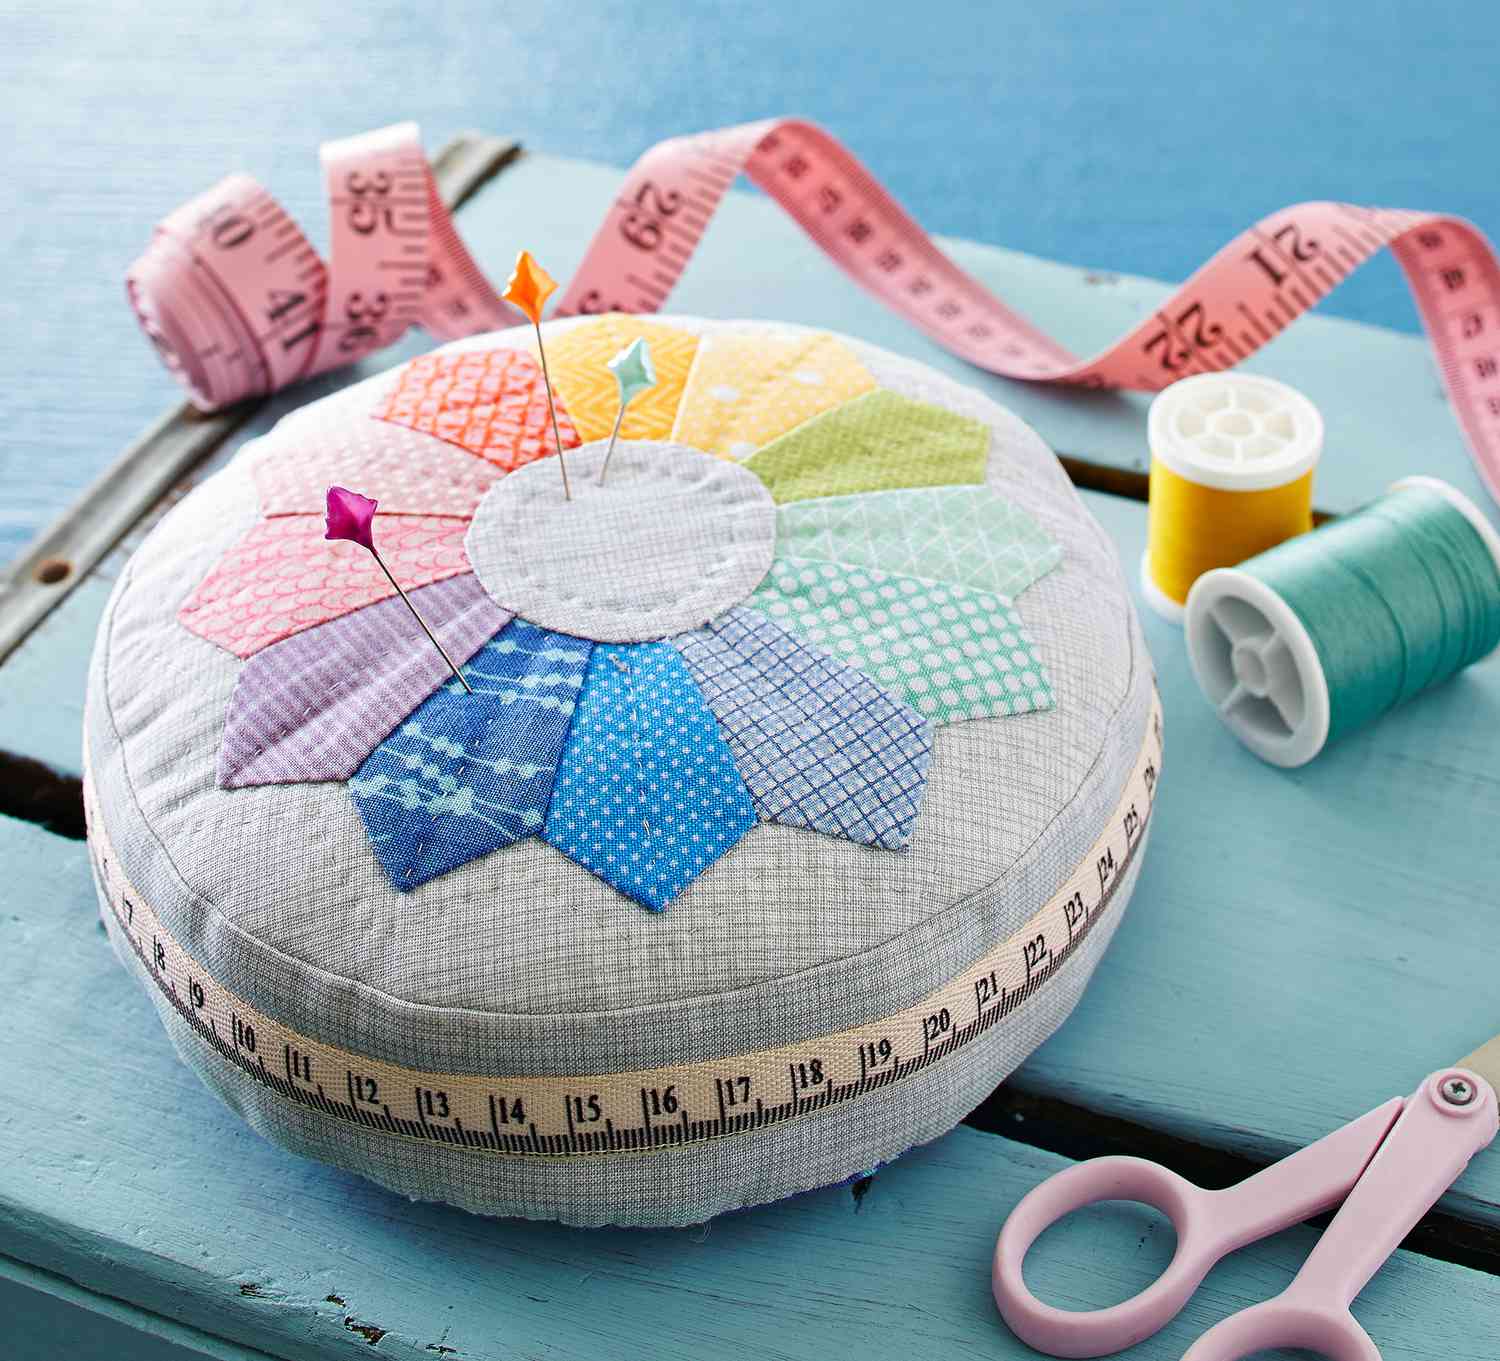 Pin Cushions - Wrist Pin Cushion for Sewing Pincushion with Soft Fabric,  Pin Patchwork Holder crafts & Sewing Blue